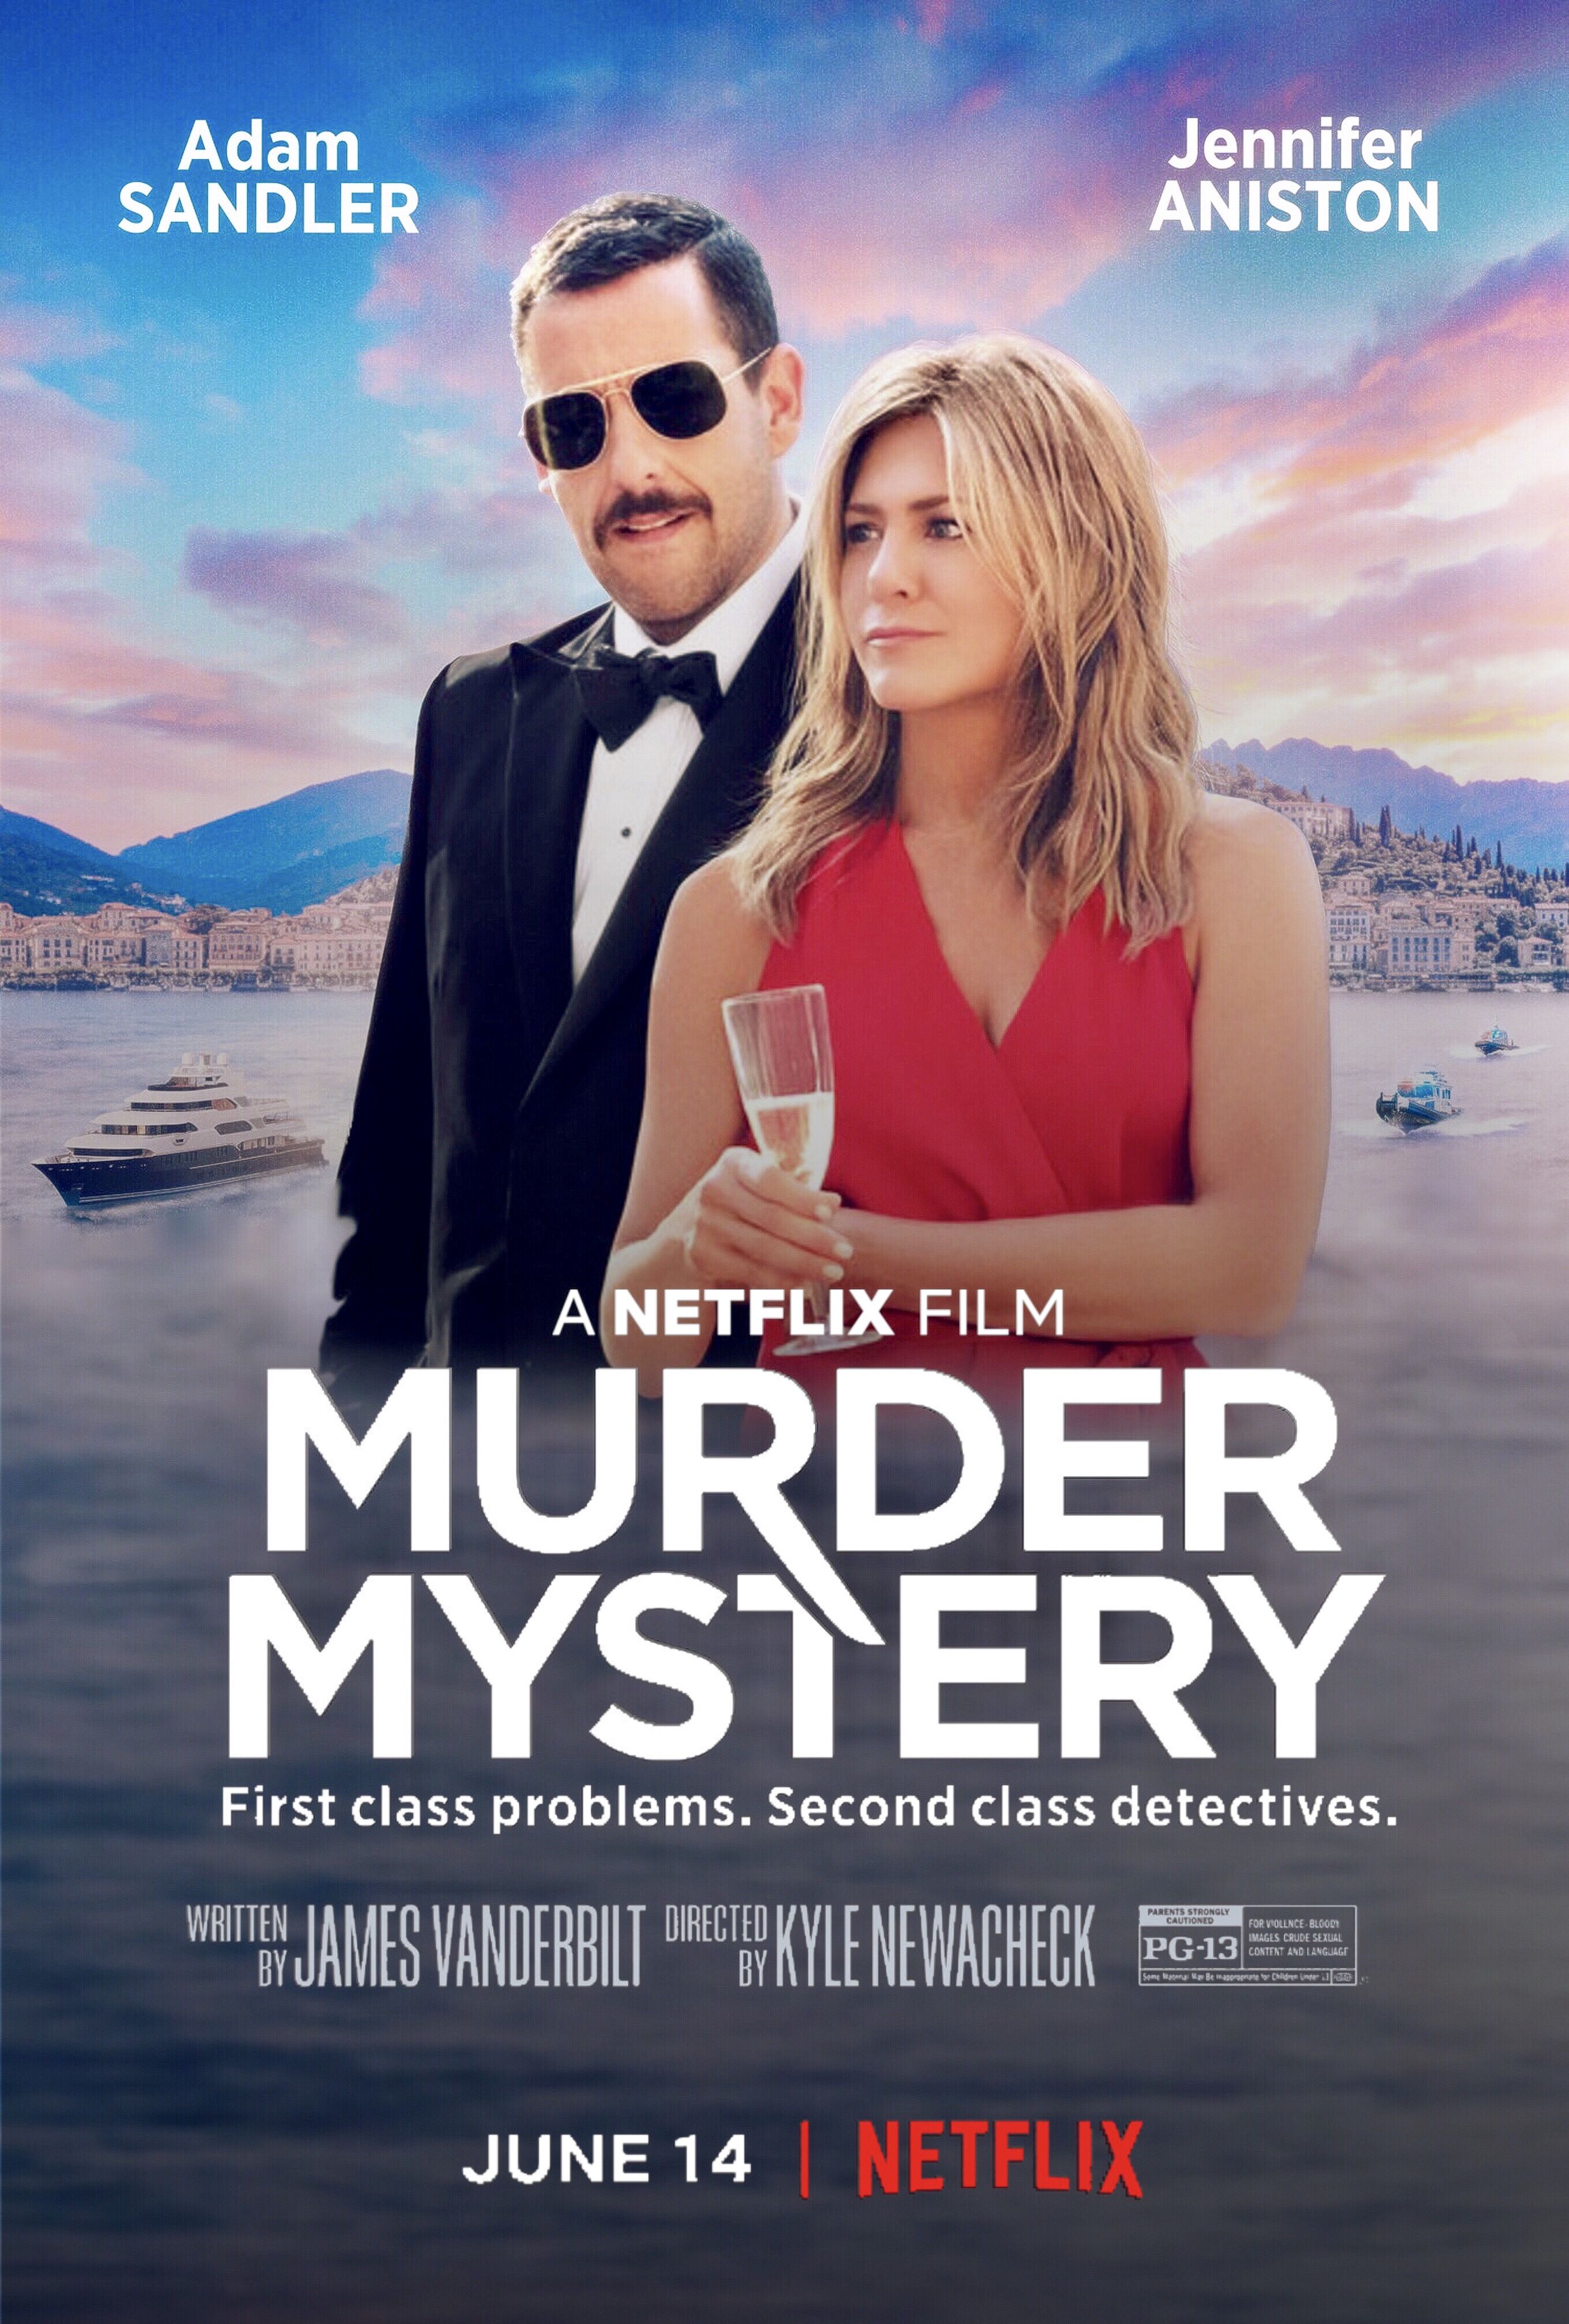 20 Best Murder Mystery Movies 2022 - Classic Whodunit Movies to